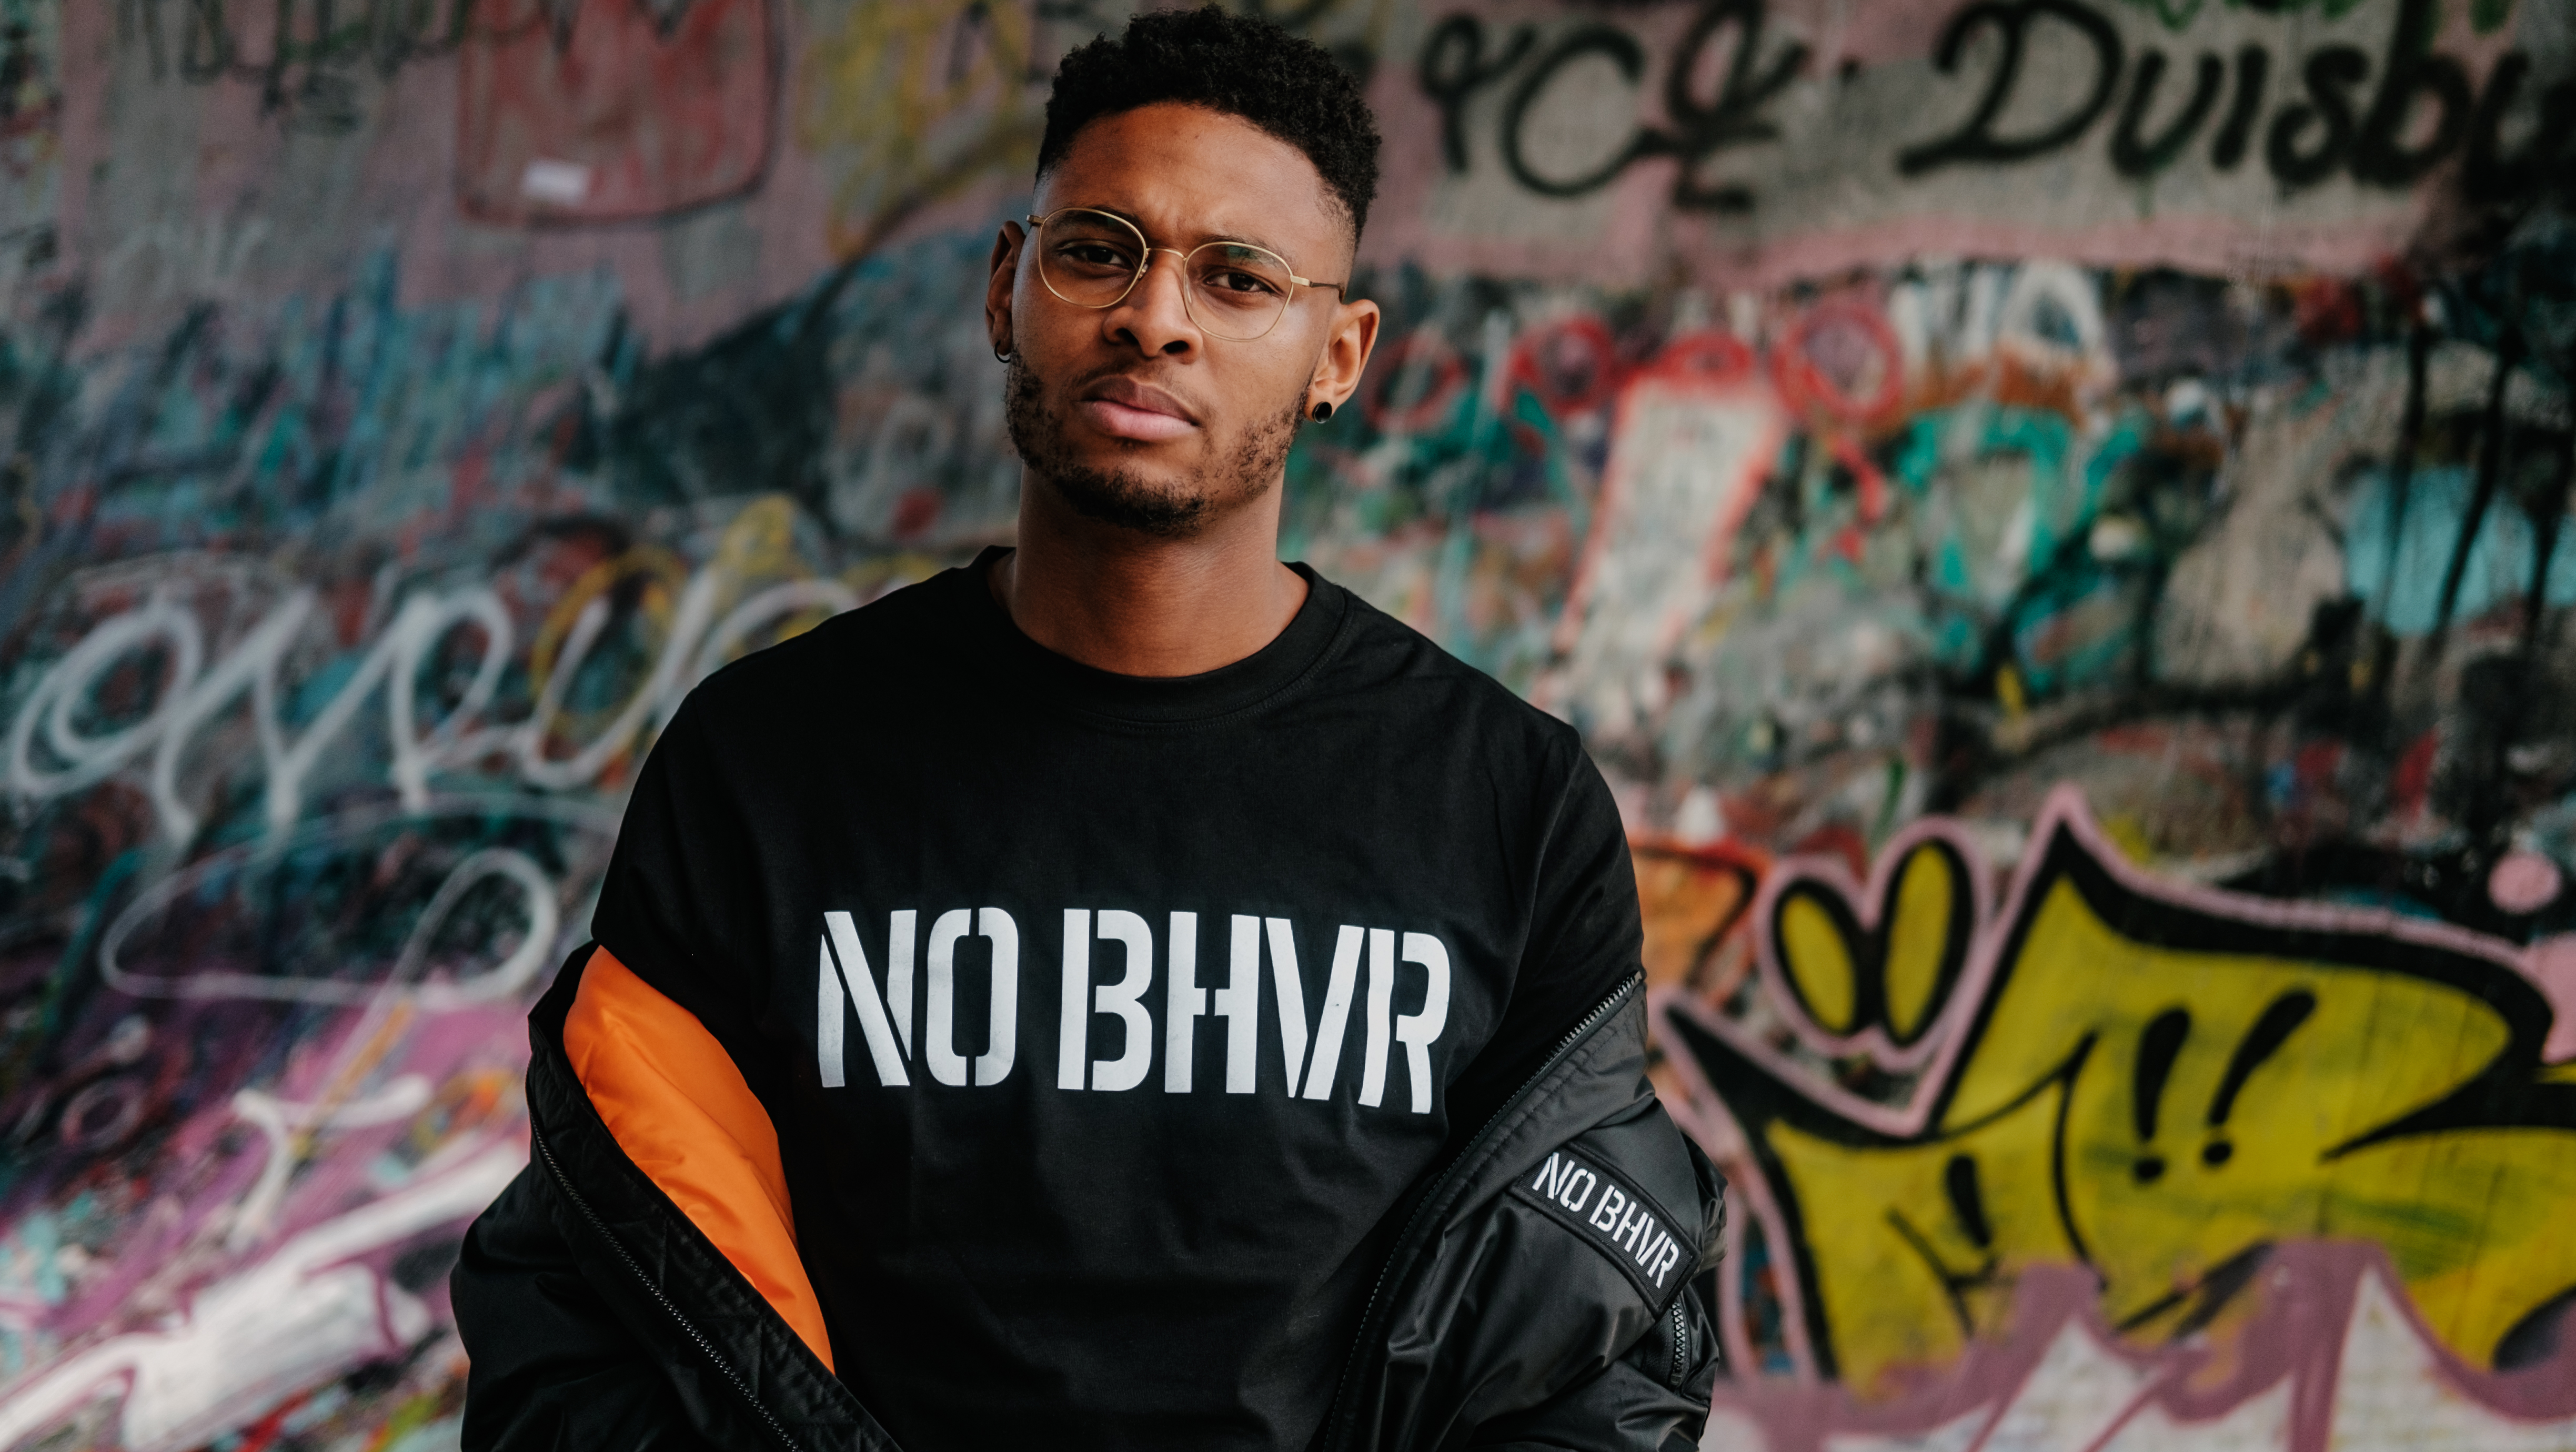 NOBHVR [@nobhvr] The Clothing Line Which Is Not Just A Brand, But A Lifestyle